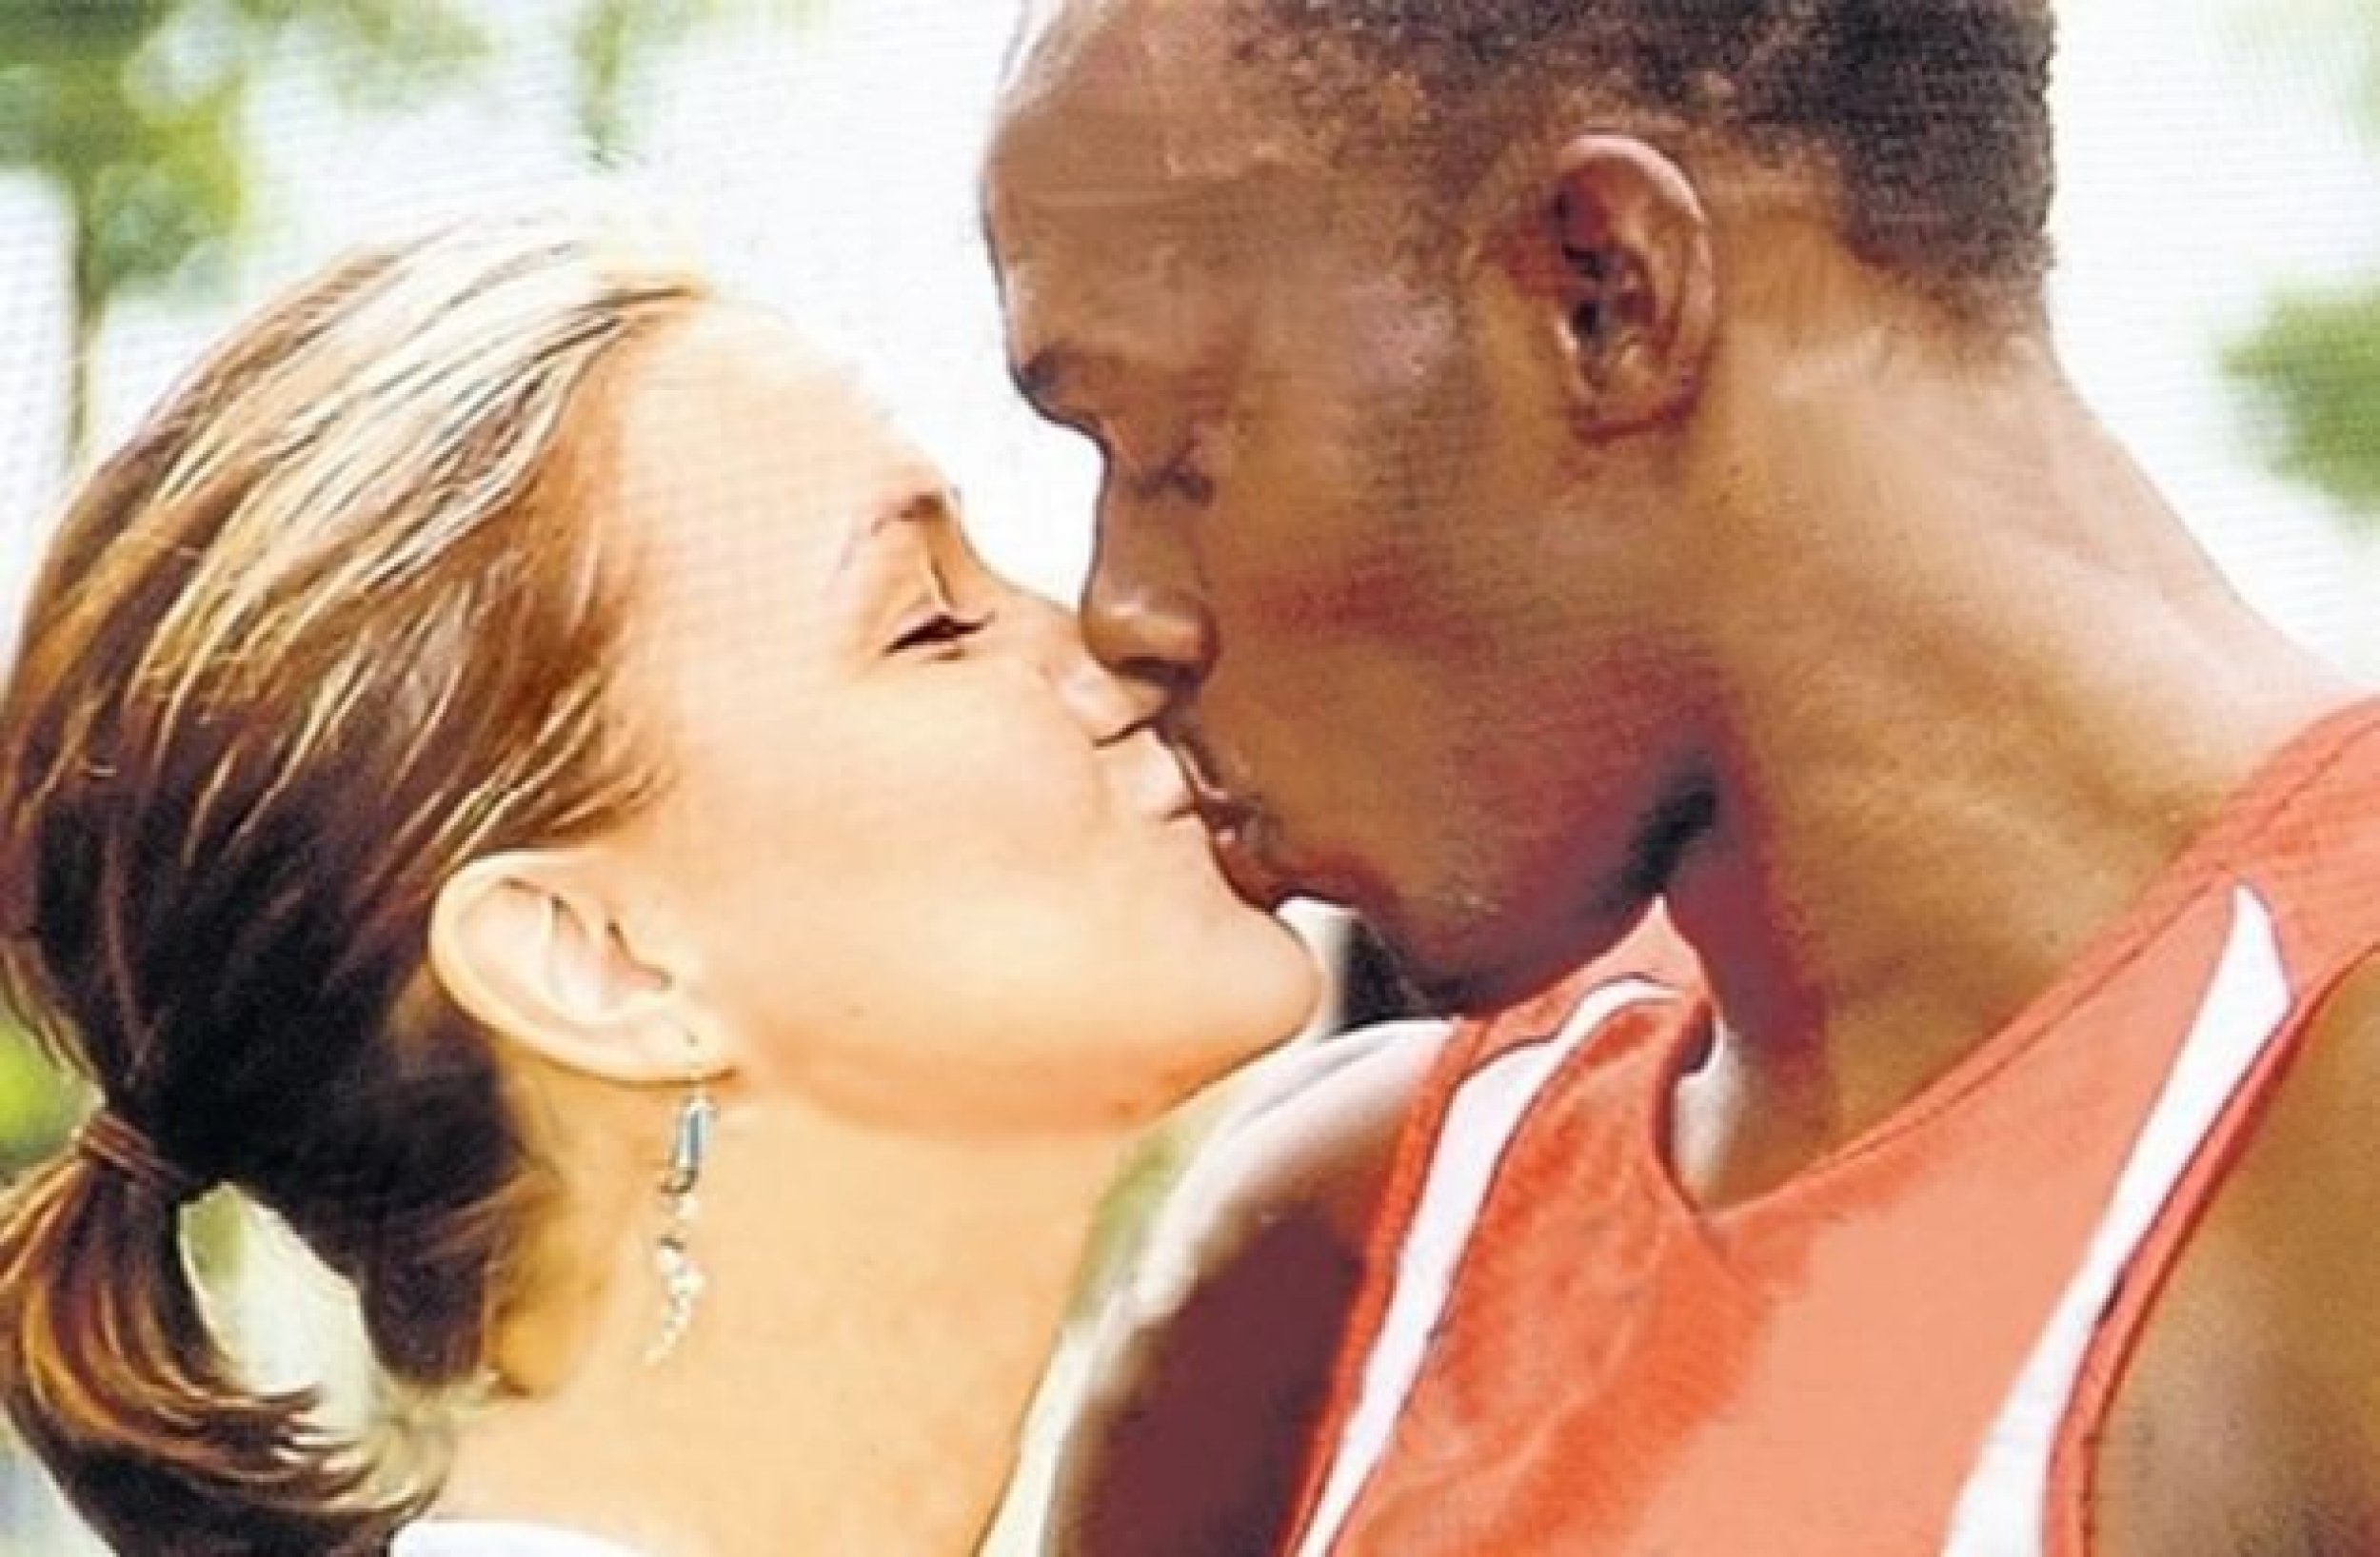 This photo of Slovak and Bolt kissing sparked racial anger from some in Jamaica.